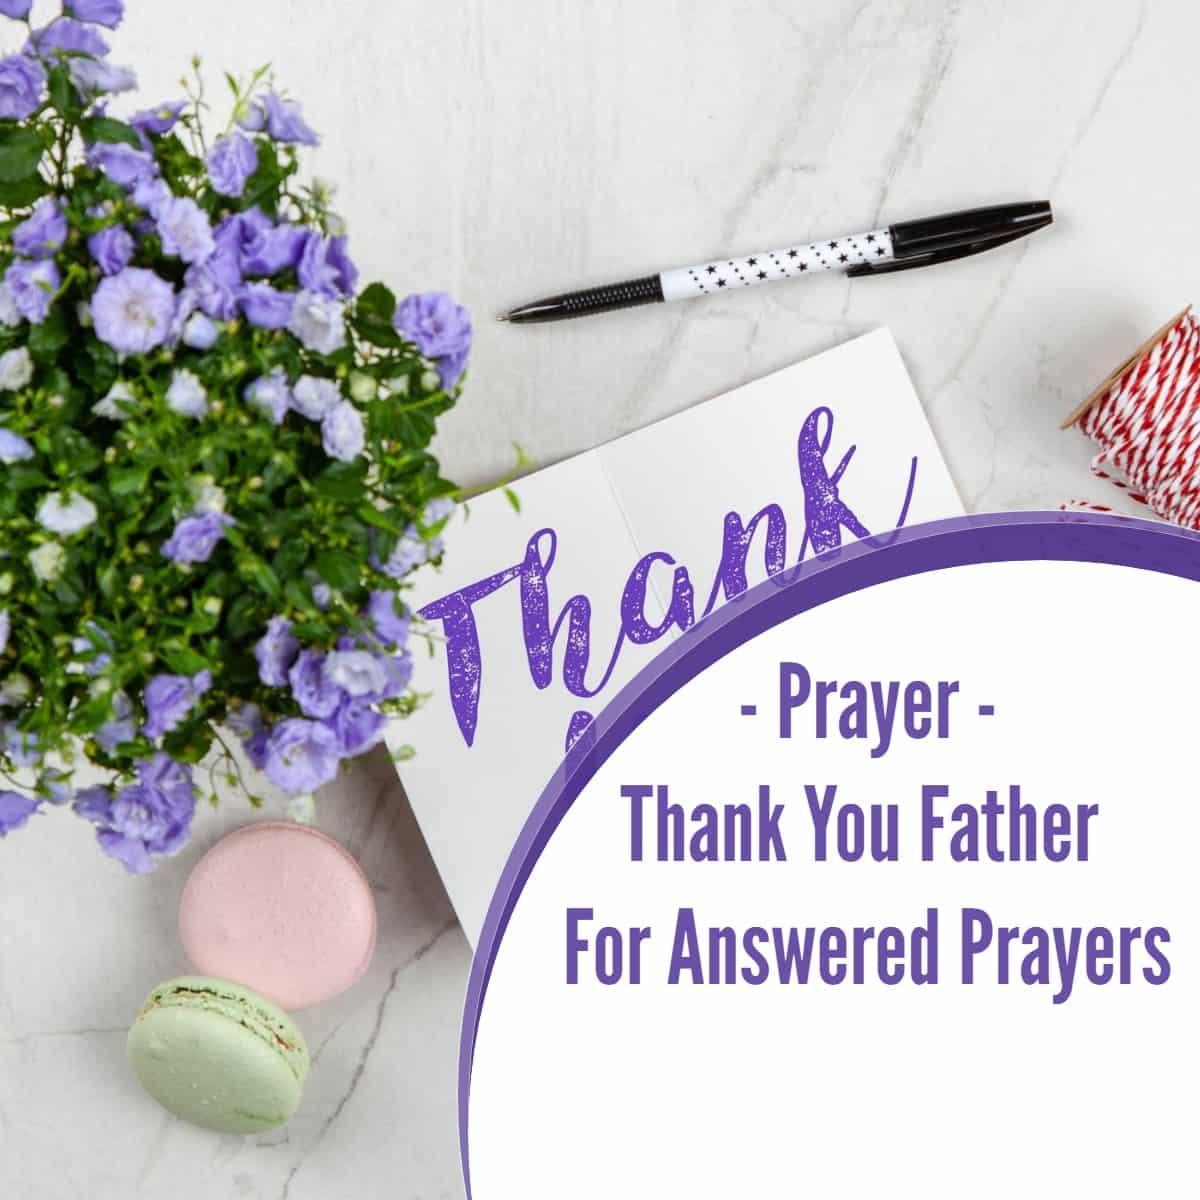 Prayer – Thank You Father For Answered Prayers